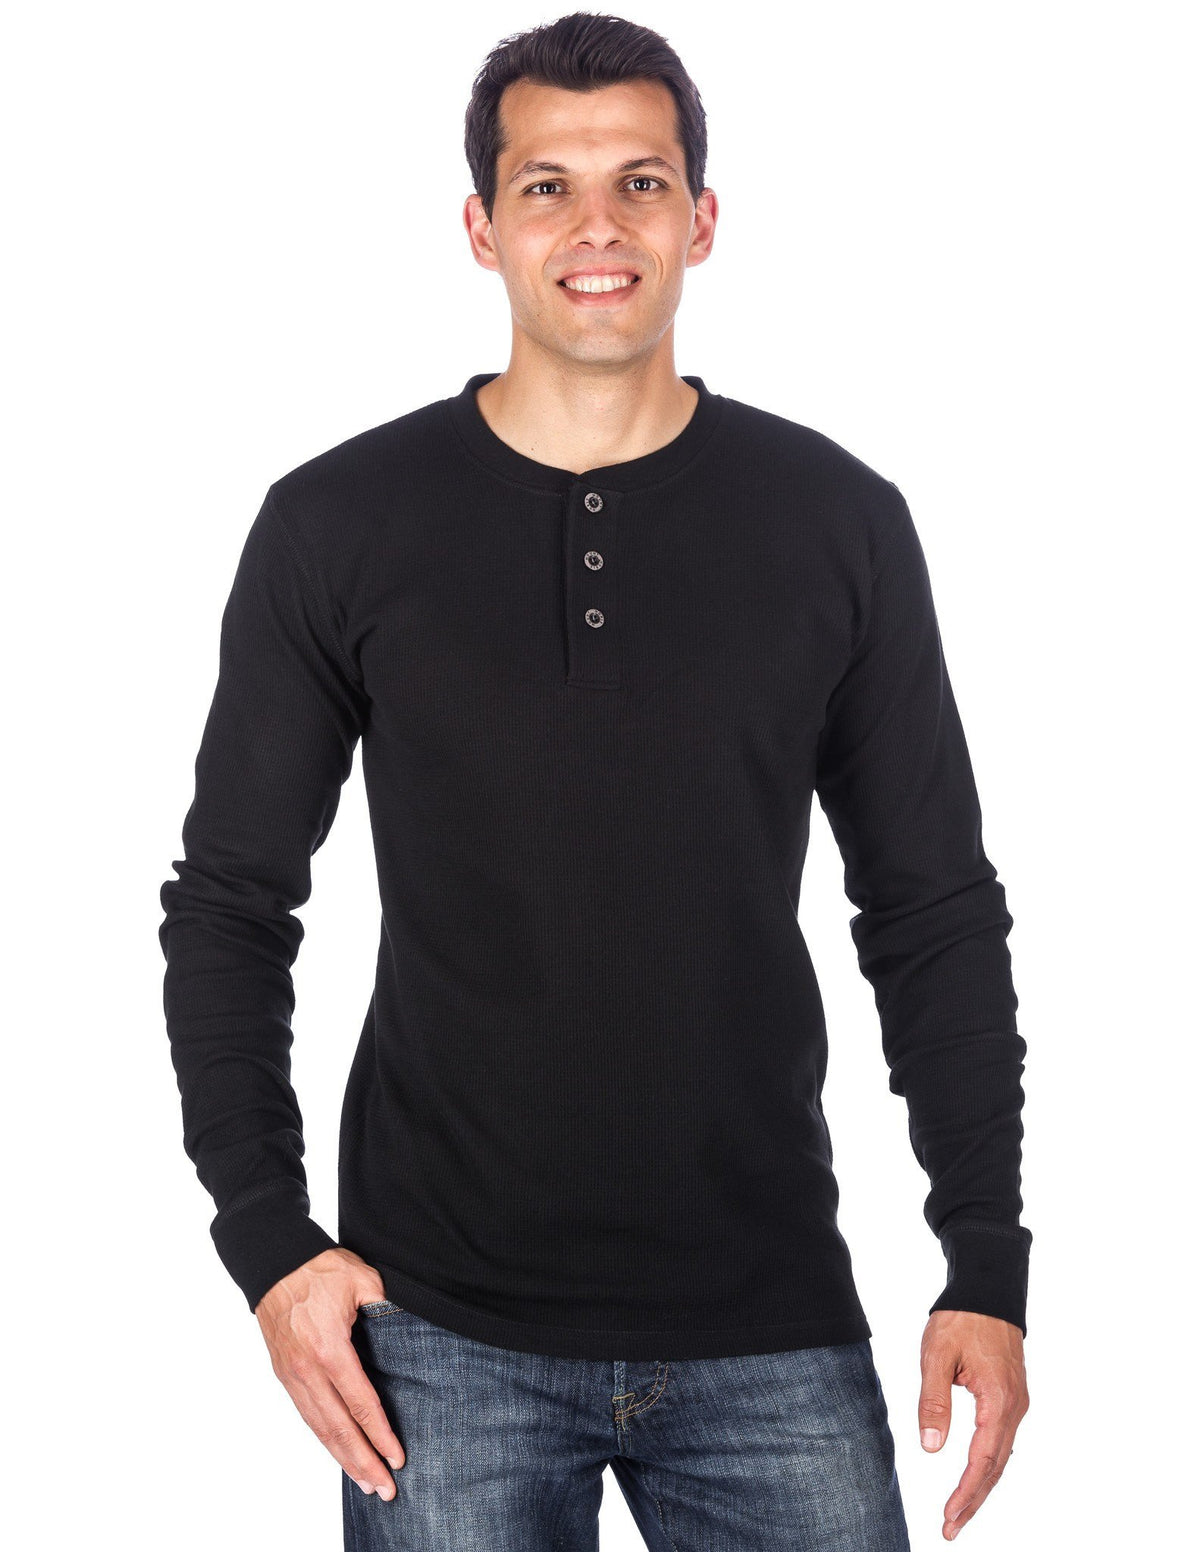 Men's Solid Thermal Henley Long Sleeve T-shirts - Real Black